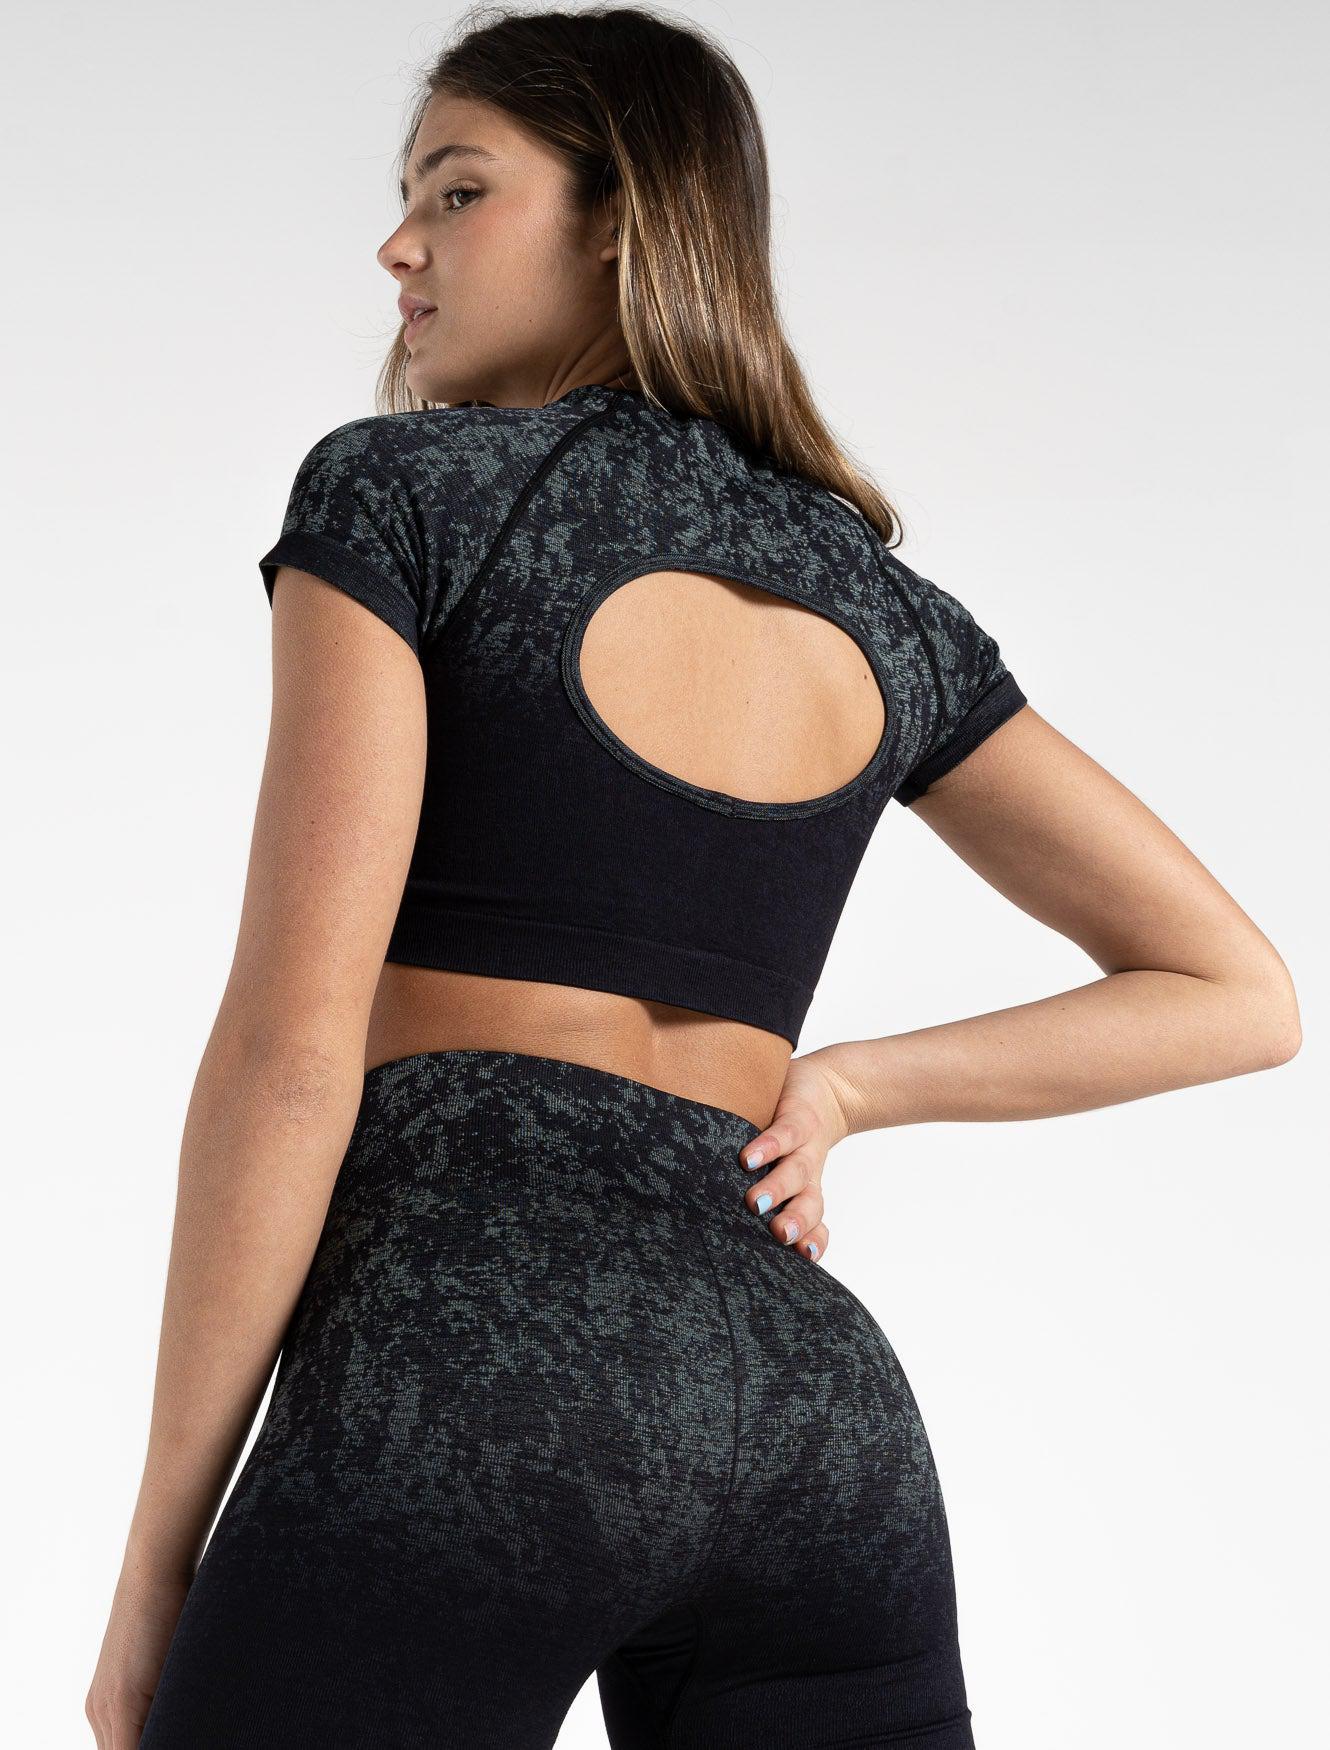 Cosmic Seamless Crop Top / Black Ombre Pursue Fitness 2